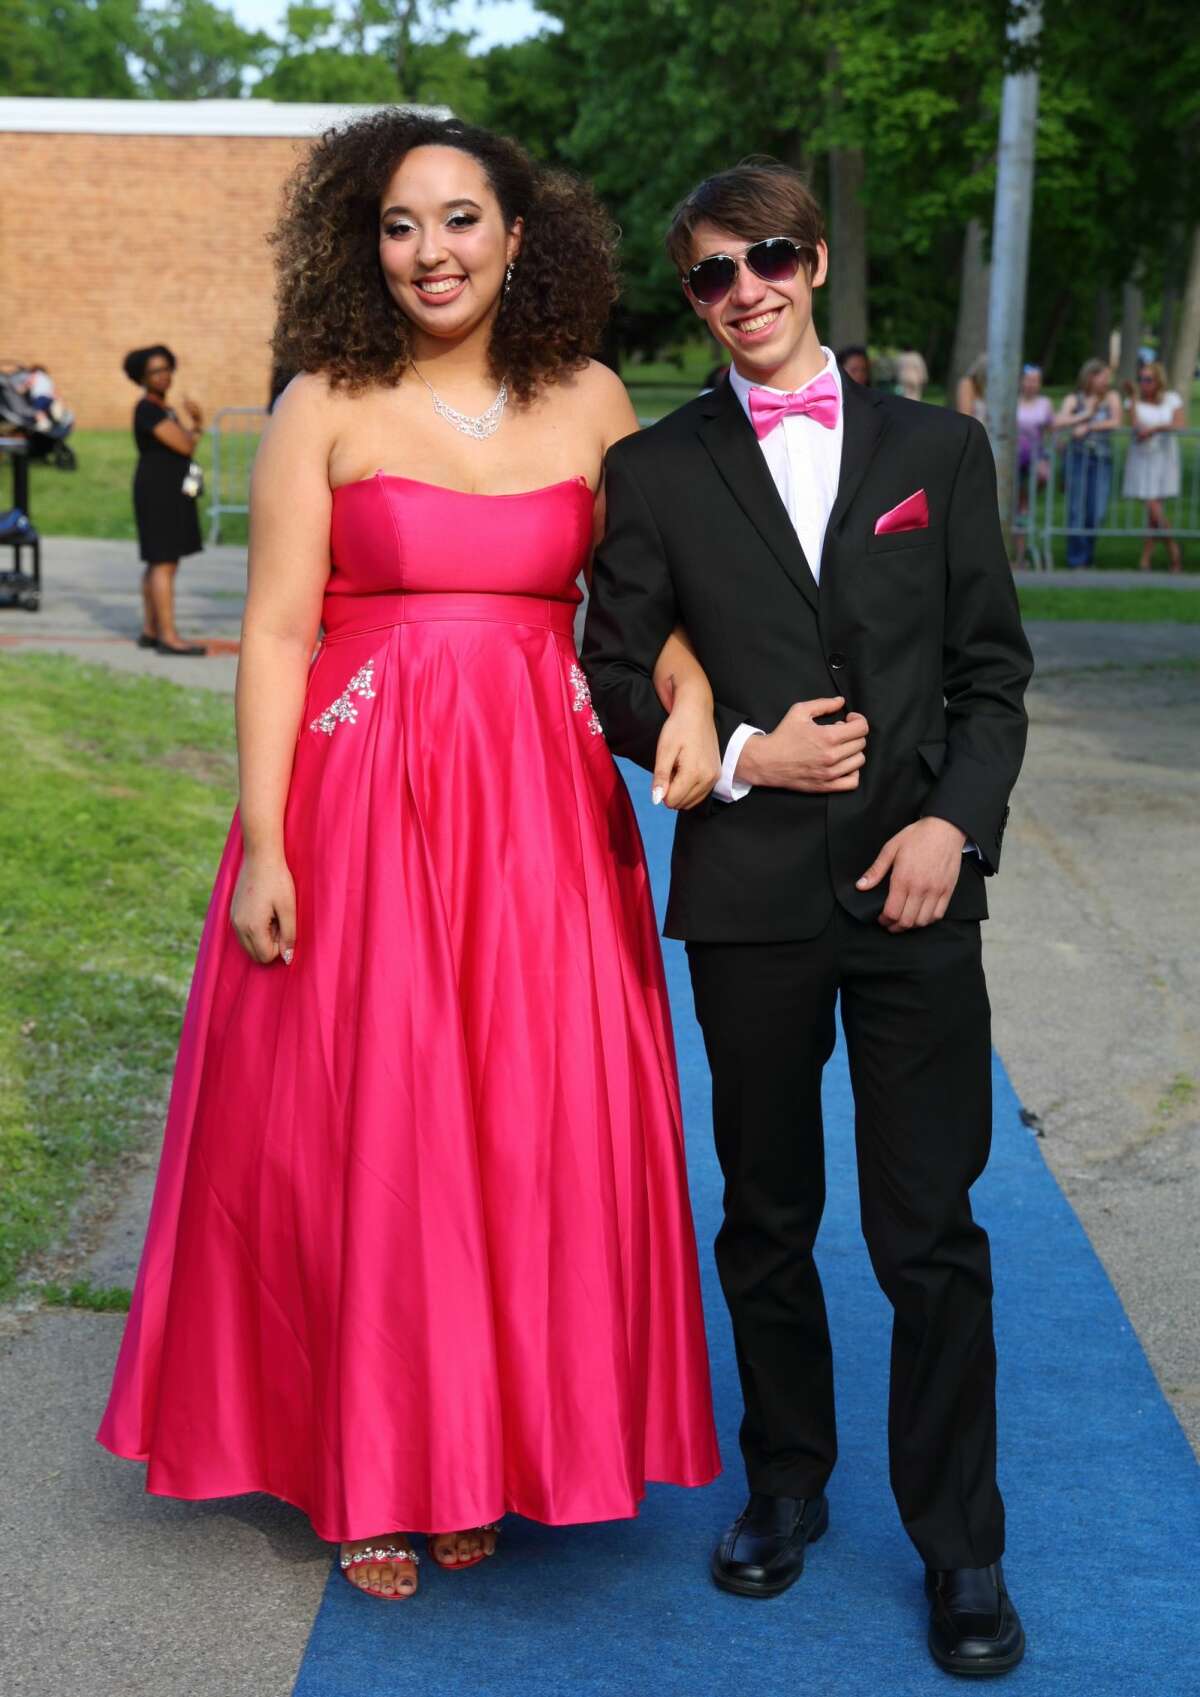 Were you Seen at the Schenectady High School Junior/Senior prom walk-in at the high school on Friday, June 8, 2018?